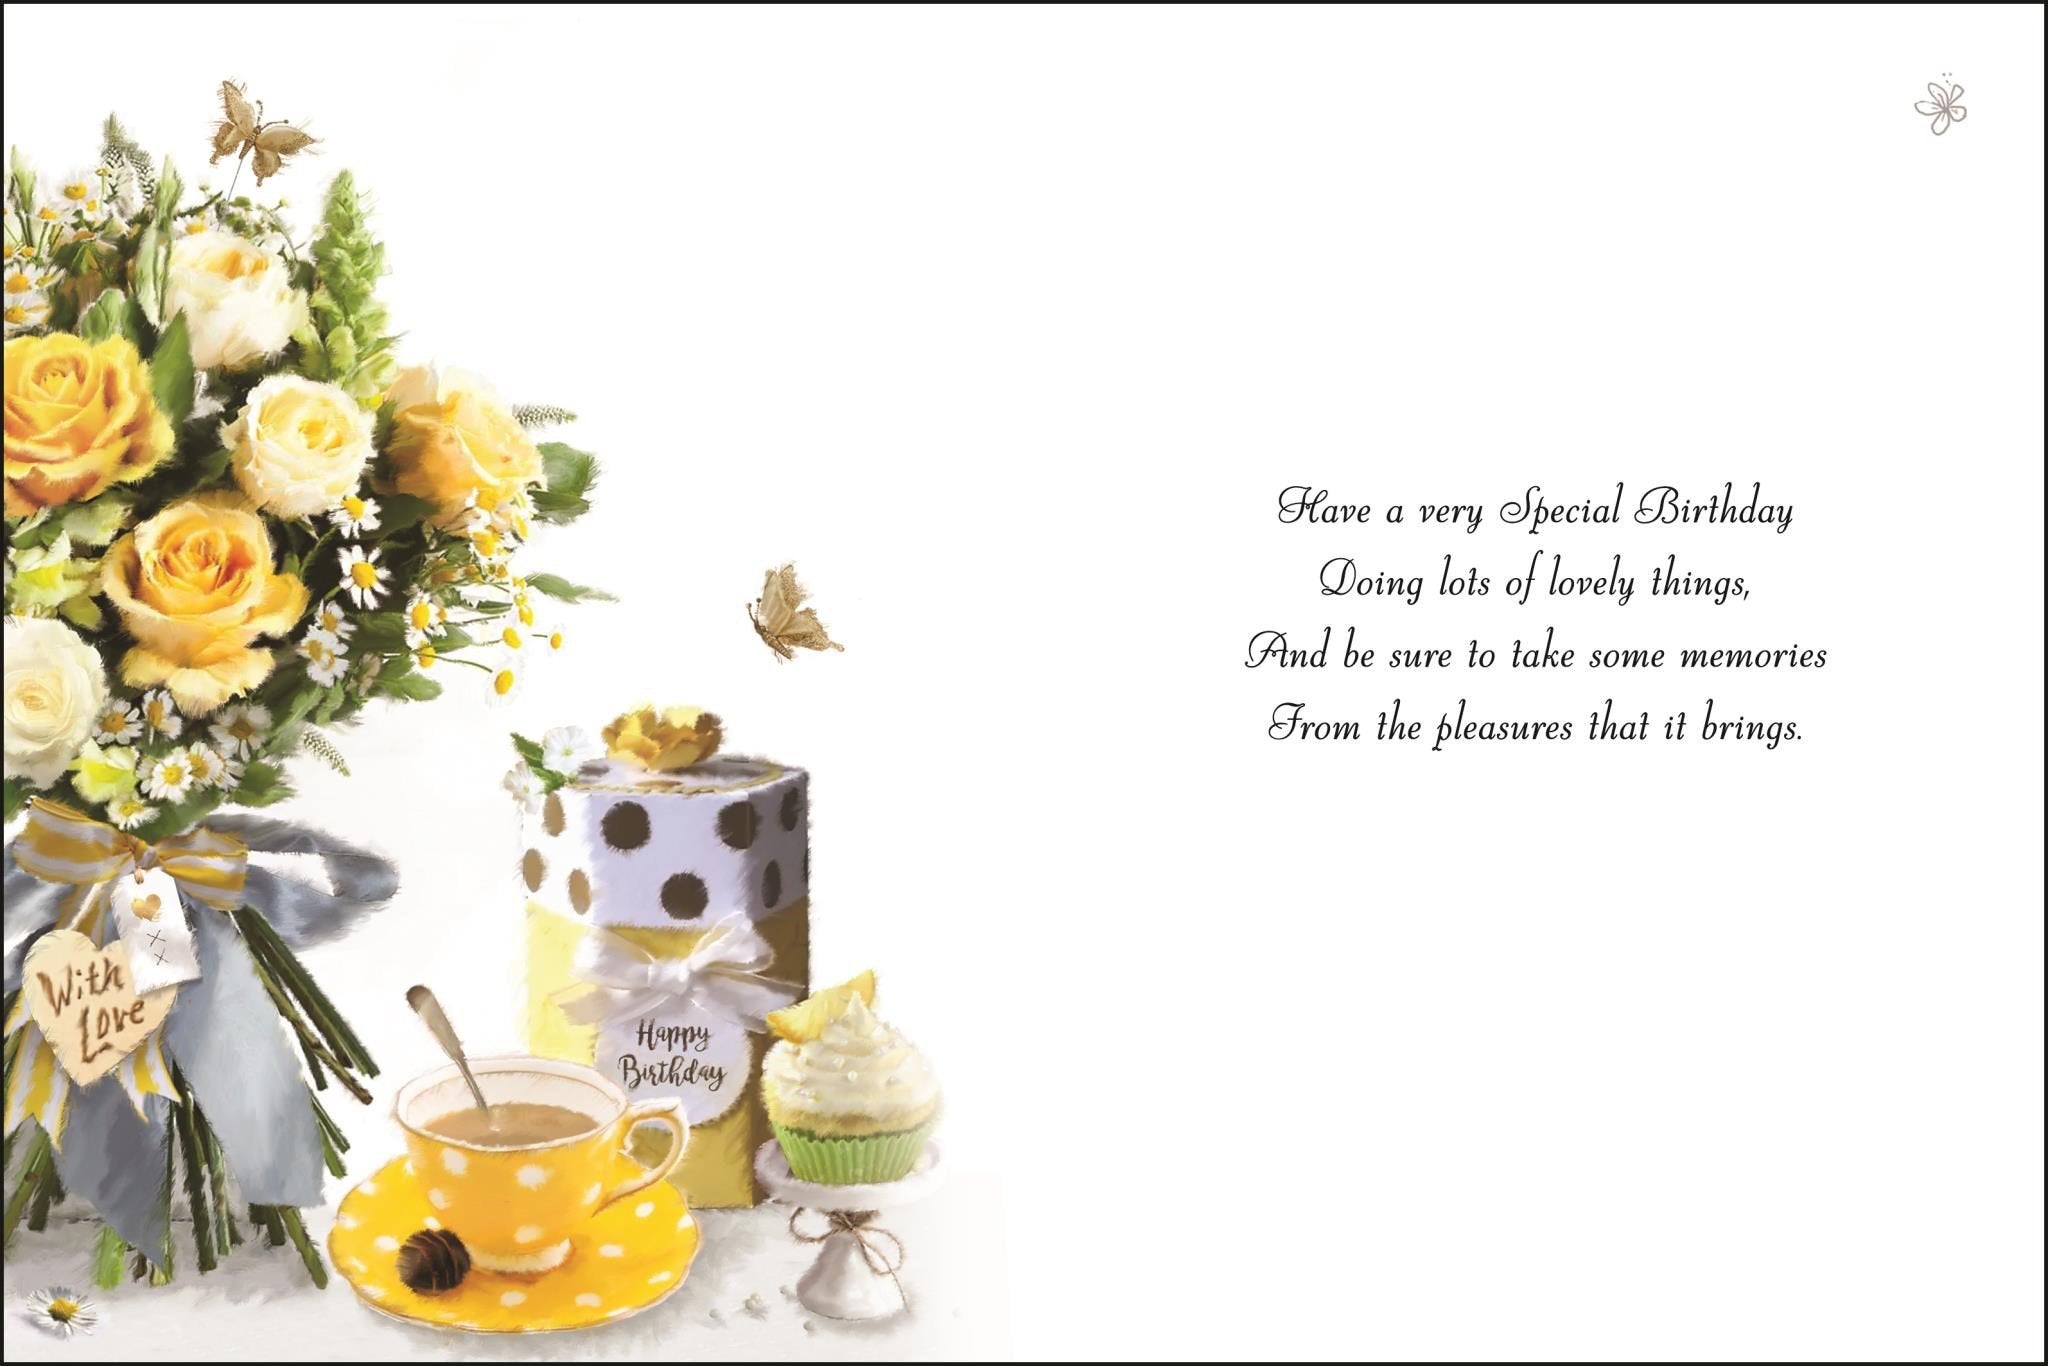 Inside of Open Female Birthday Spotty Teacup Greetings Card